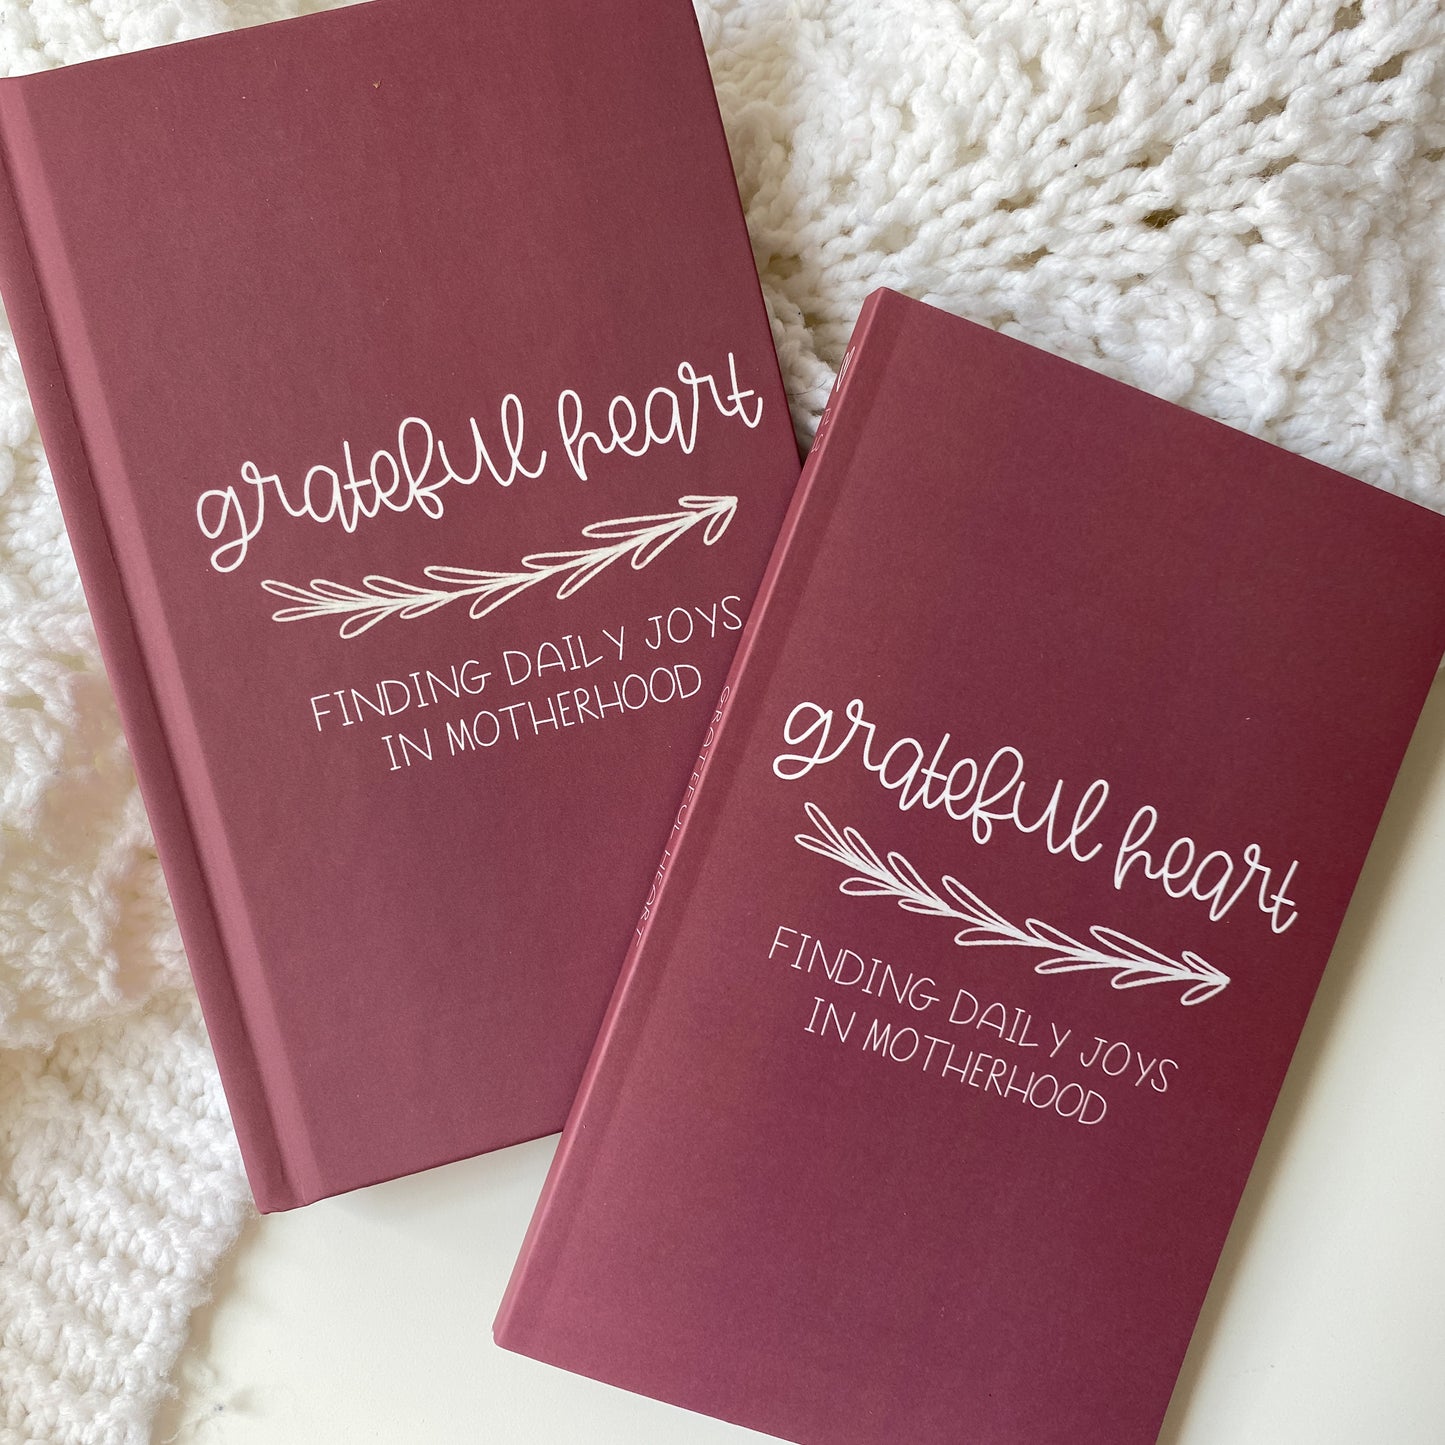 Maroon gratitude journals in hardcover and paperback titled Grateful Heart Finding Daily Joys in Motherhood